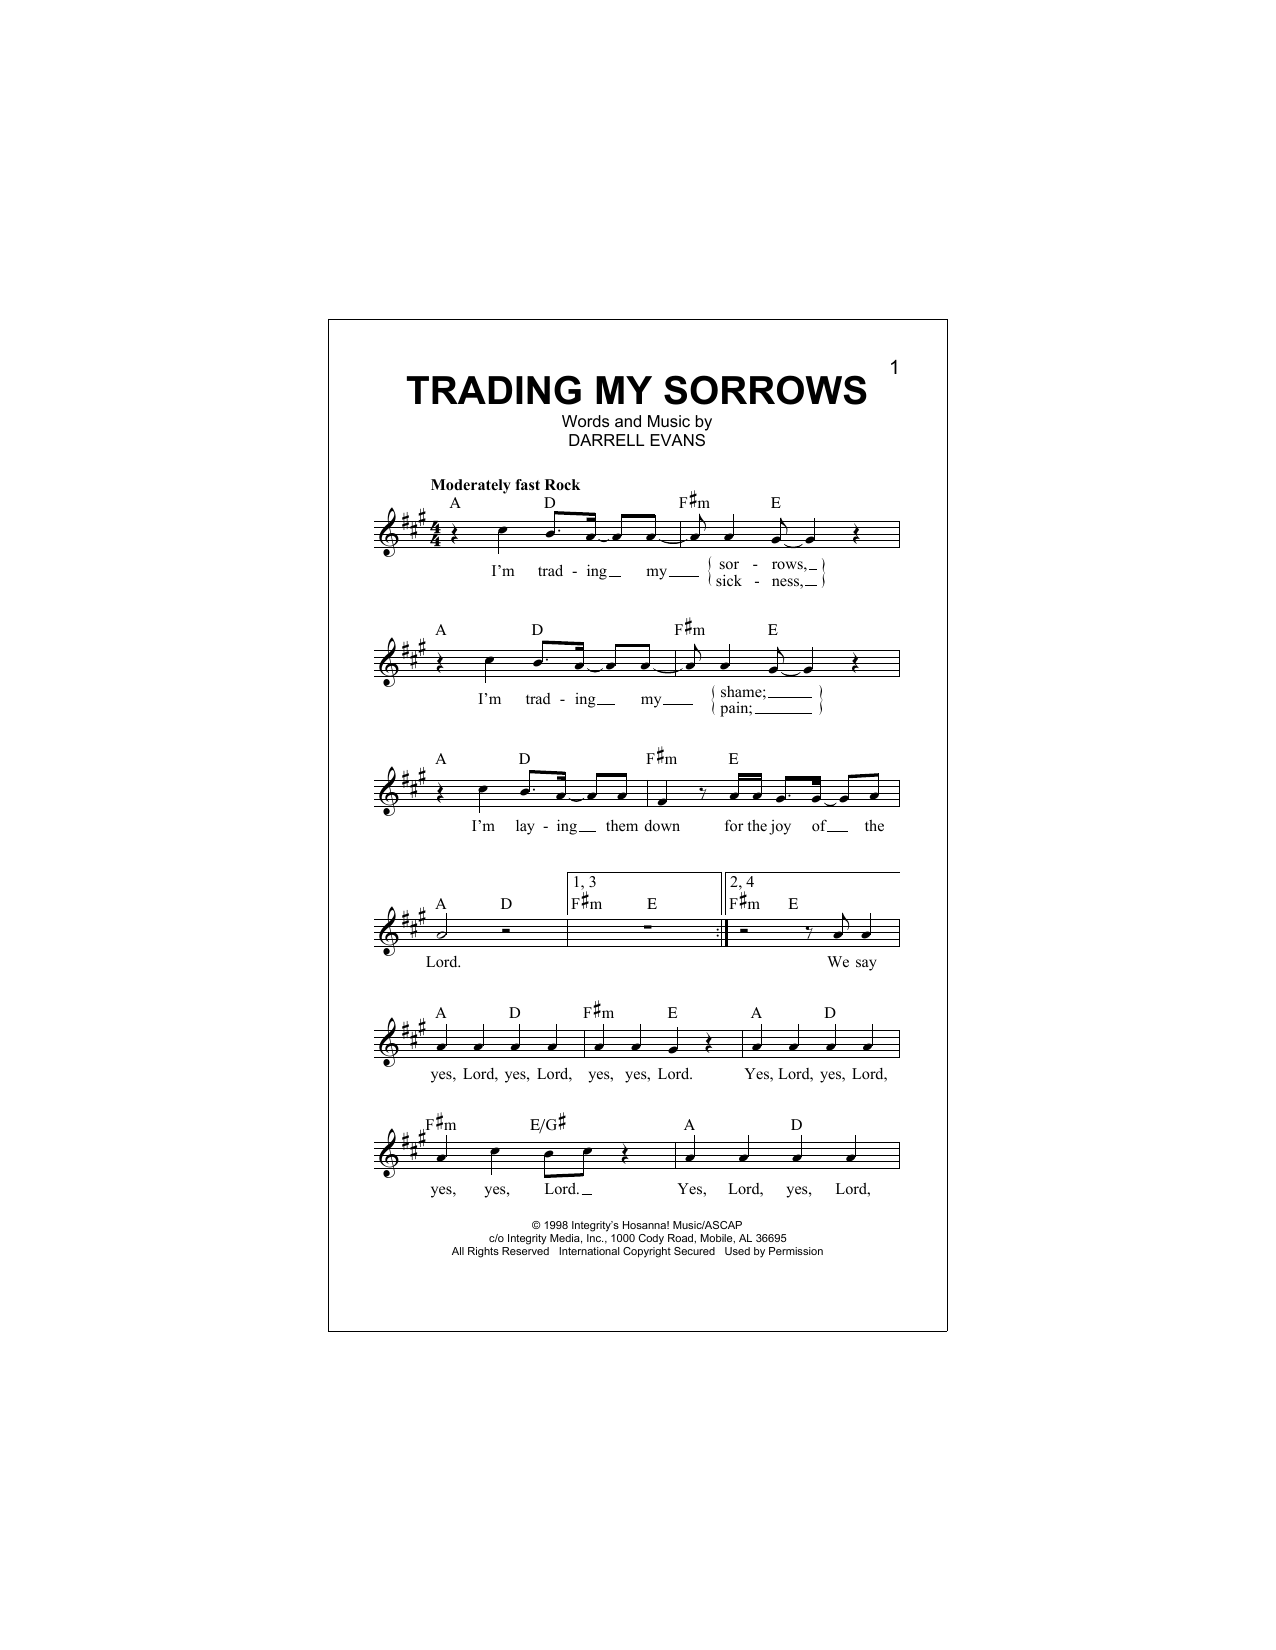 Download Darrell Evans Trading My Sorrows Sheet Music